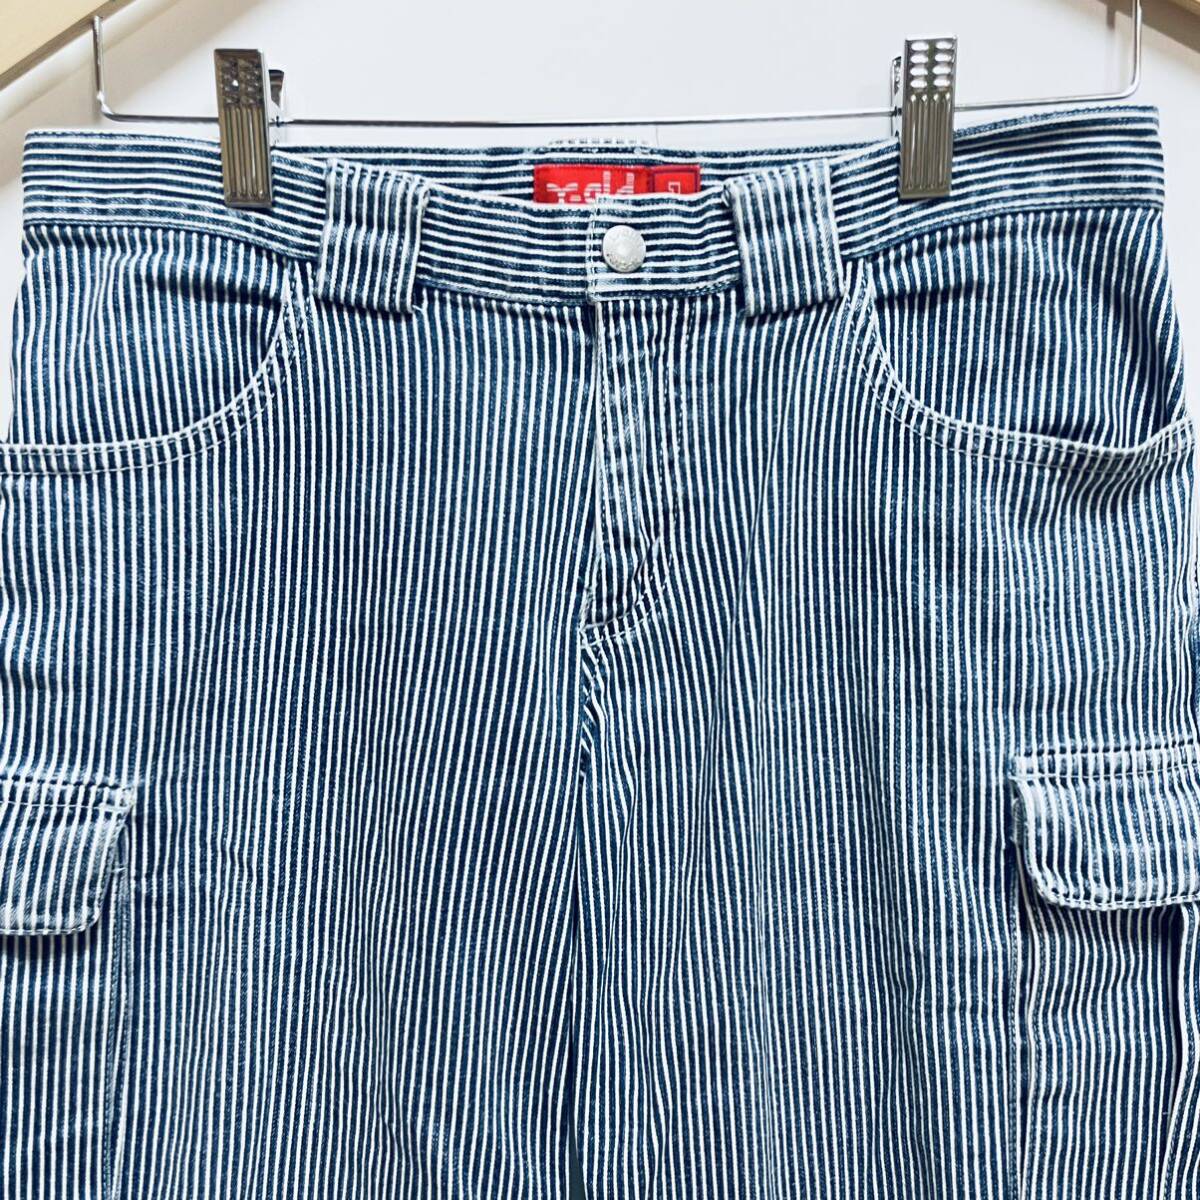 H7661gg X-girl X-girl size 1(S rank ) shorts Denim stripe Hickory lady's made in Japan blue knee height 